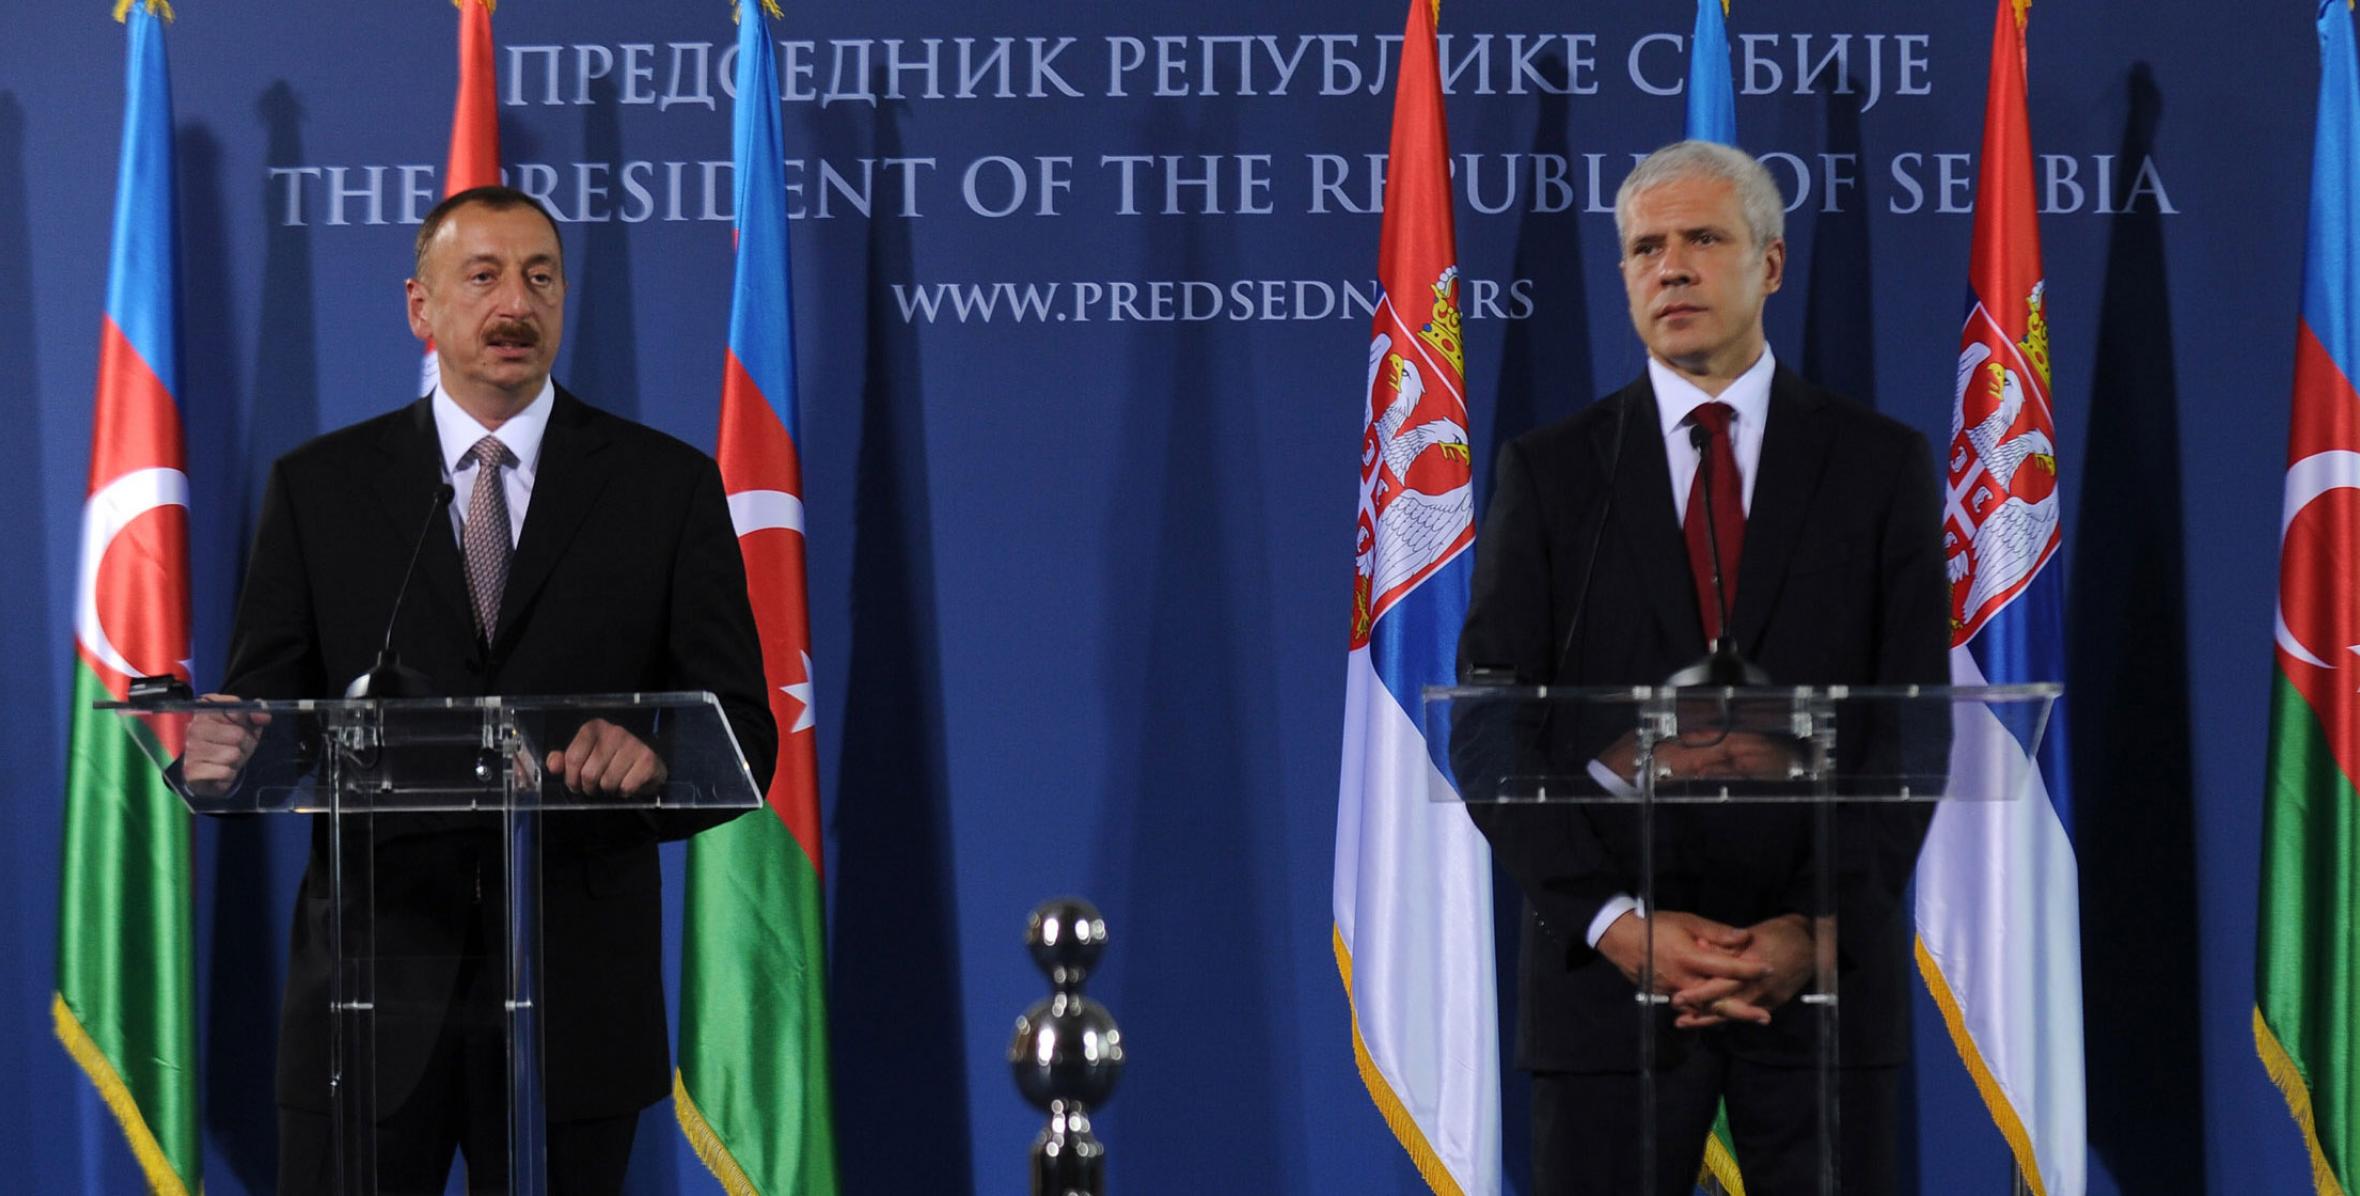 Presidents of Azerbaijan and Serbia made statements for the press